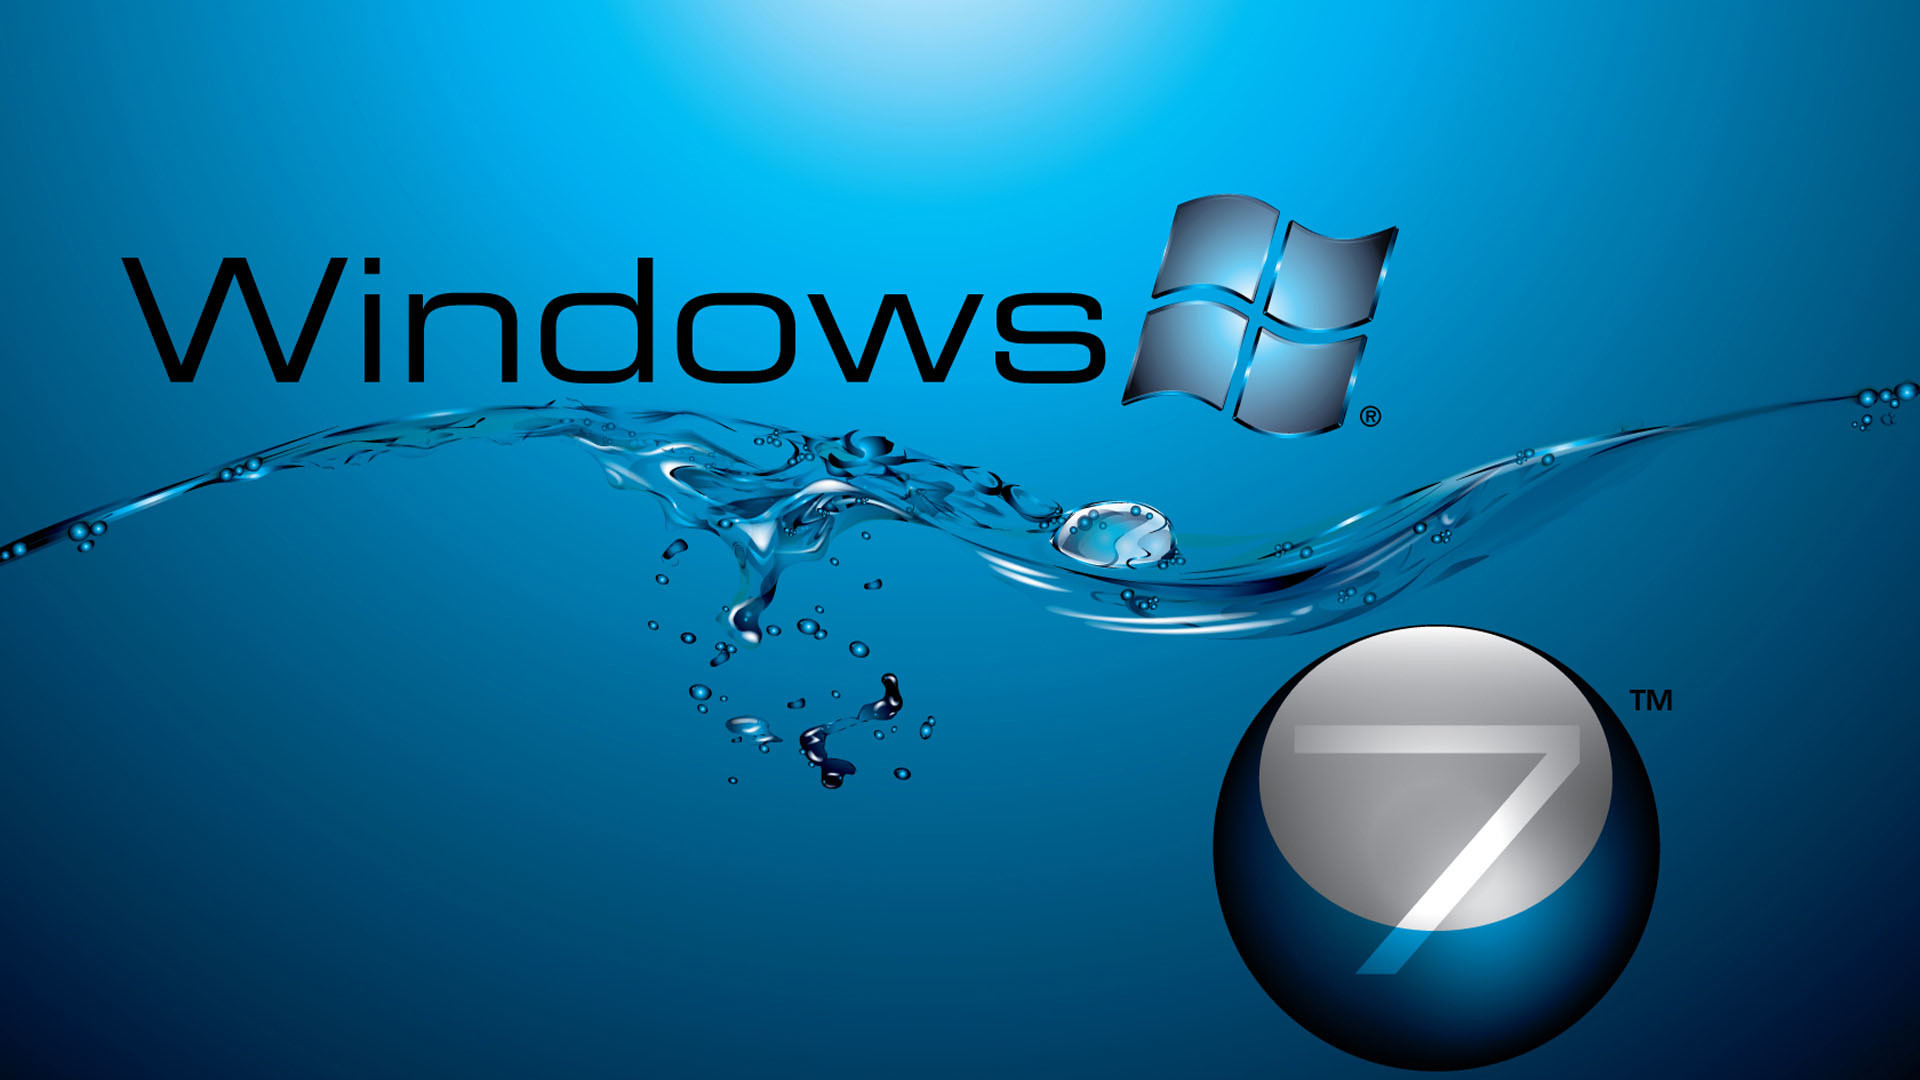 1920x1080 High Definition Windows Wallpapers/Backgrounds For Free Download 1920Ã1080